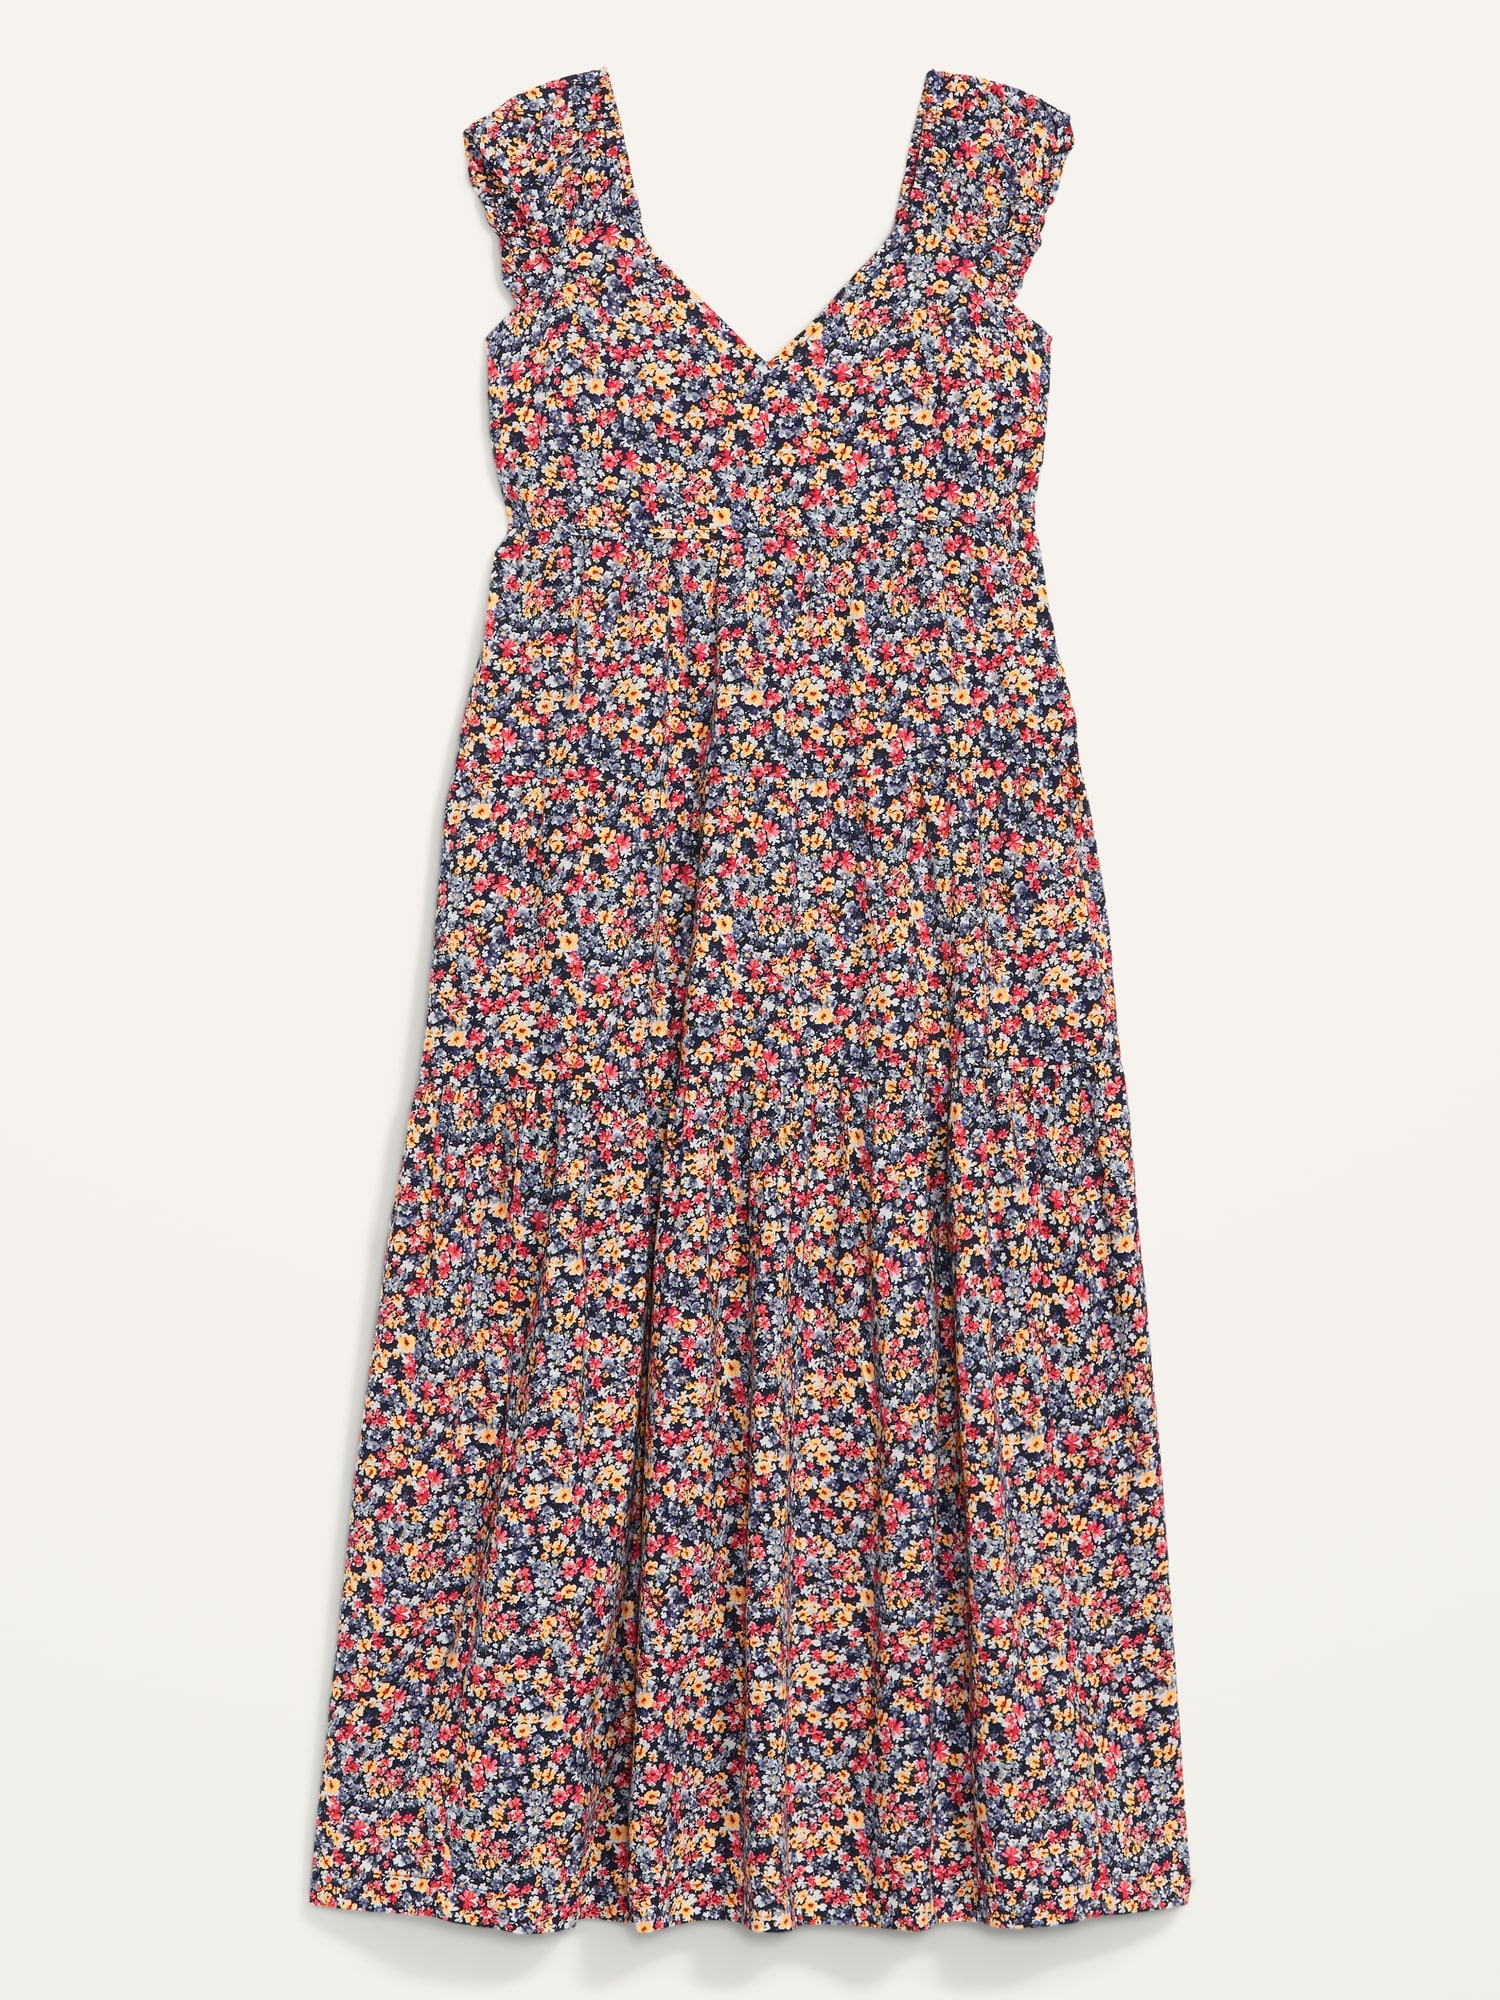 Tiered All-Day Fit & Flare Maxi Dress for Women | Old Navy